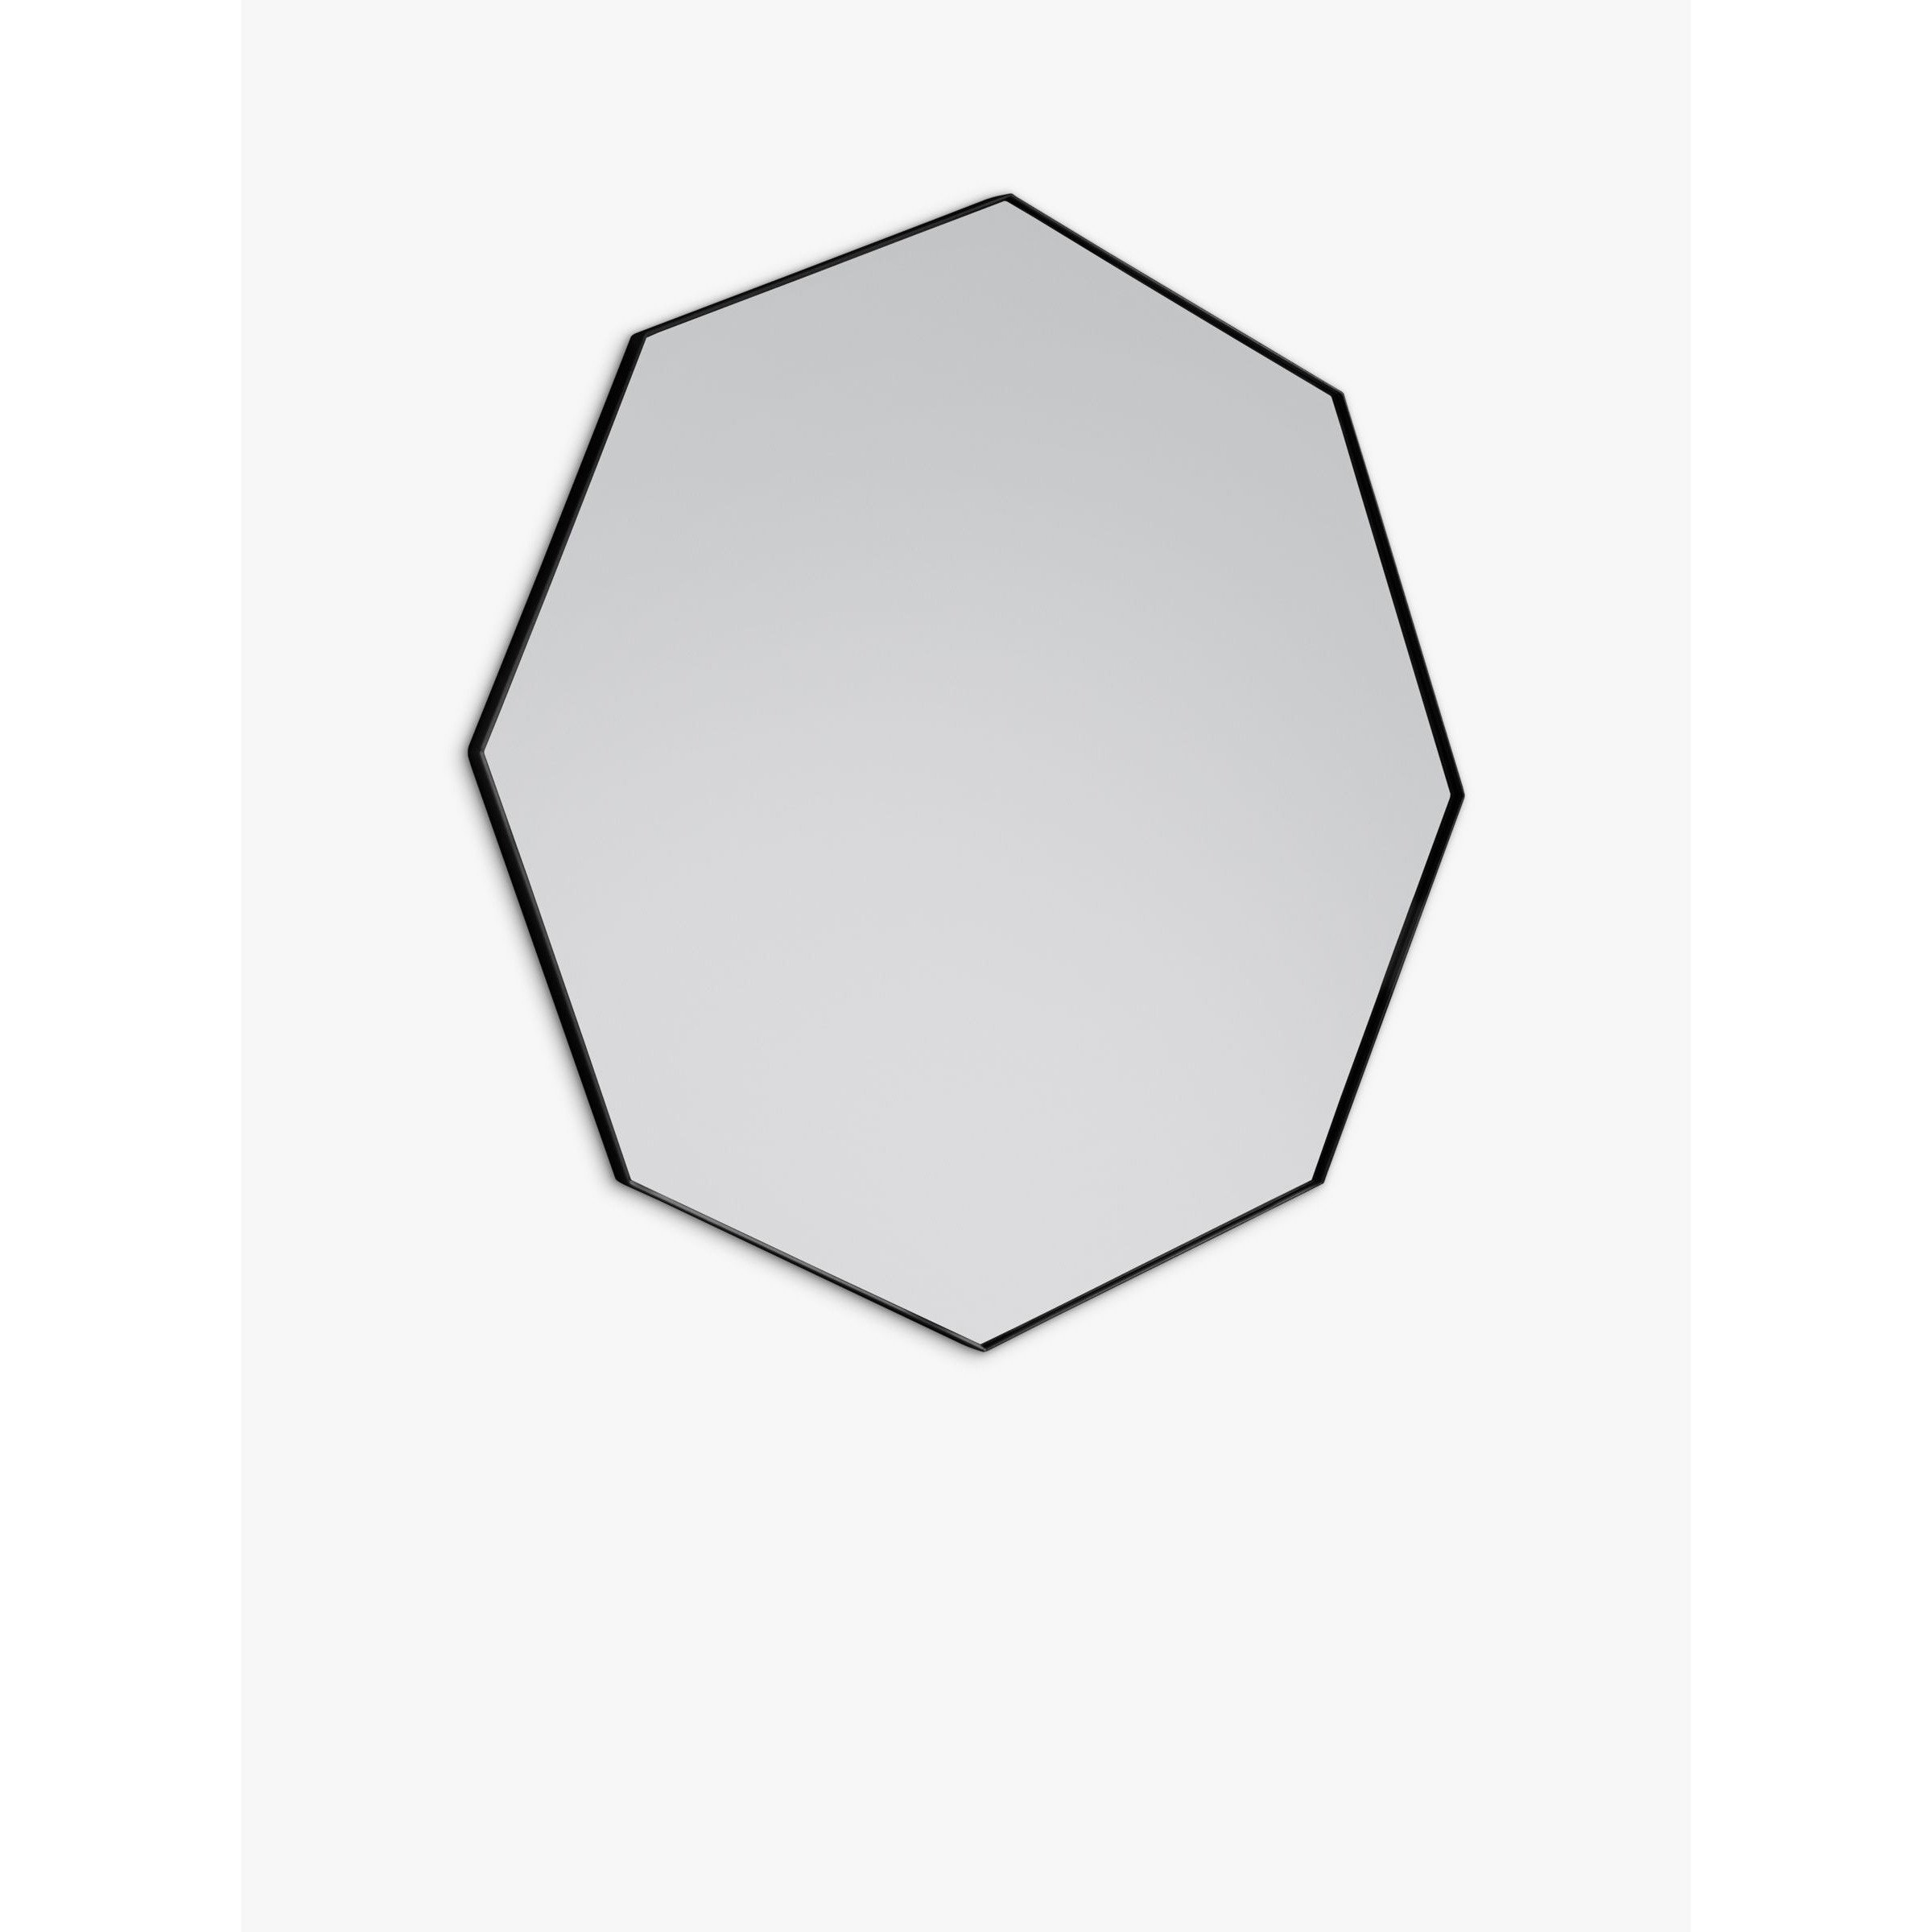 Gallery Direct Bowie Octagonal Metal Frame Mirror, 80 x 80cm - image 1